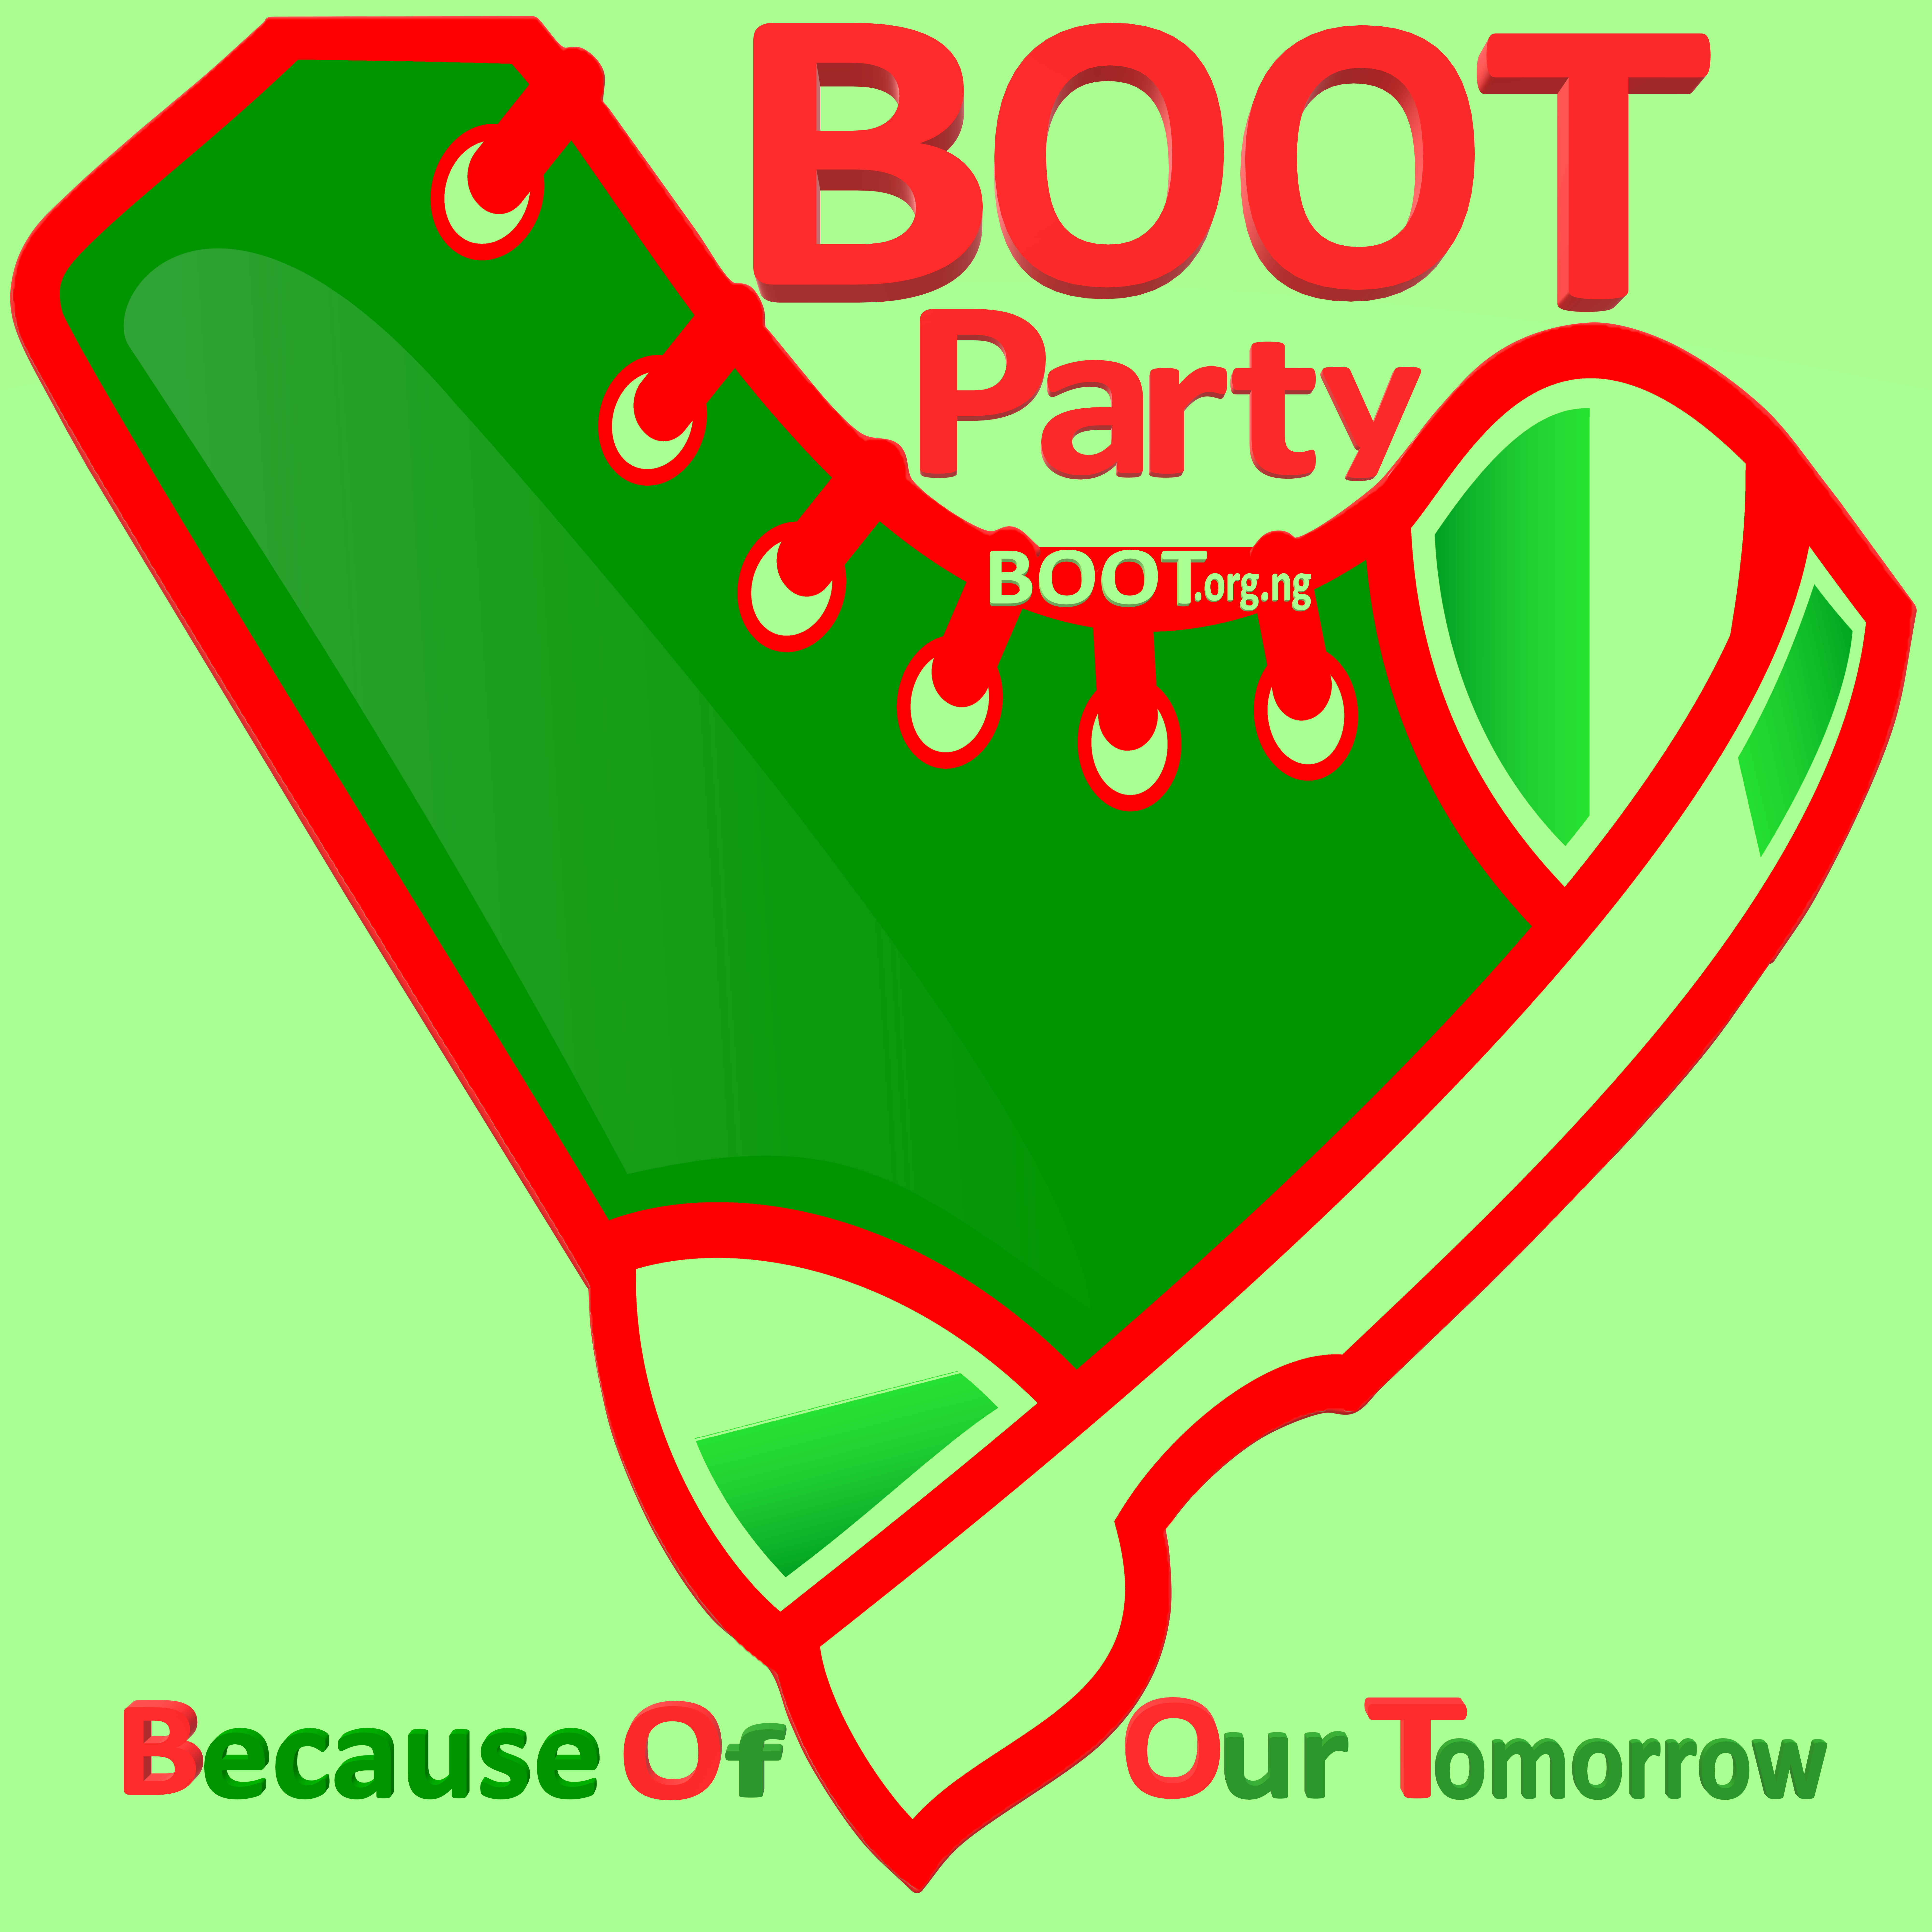 BOOT Party